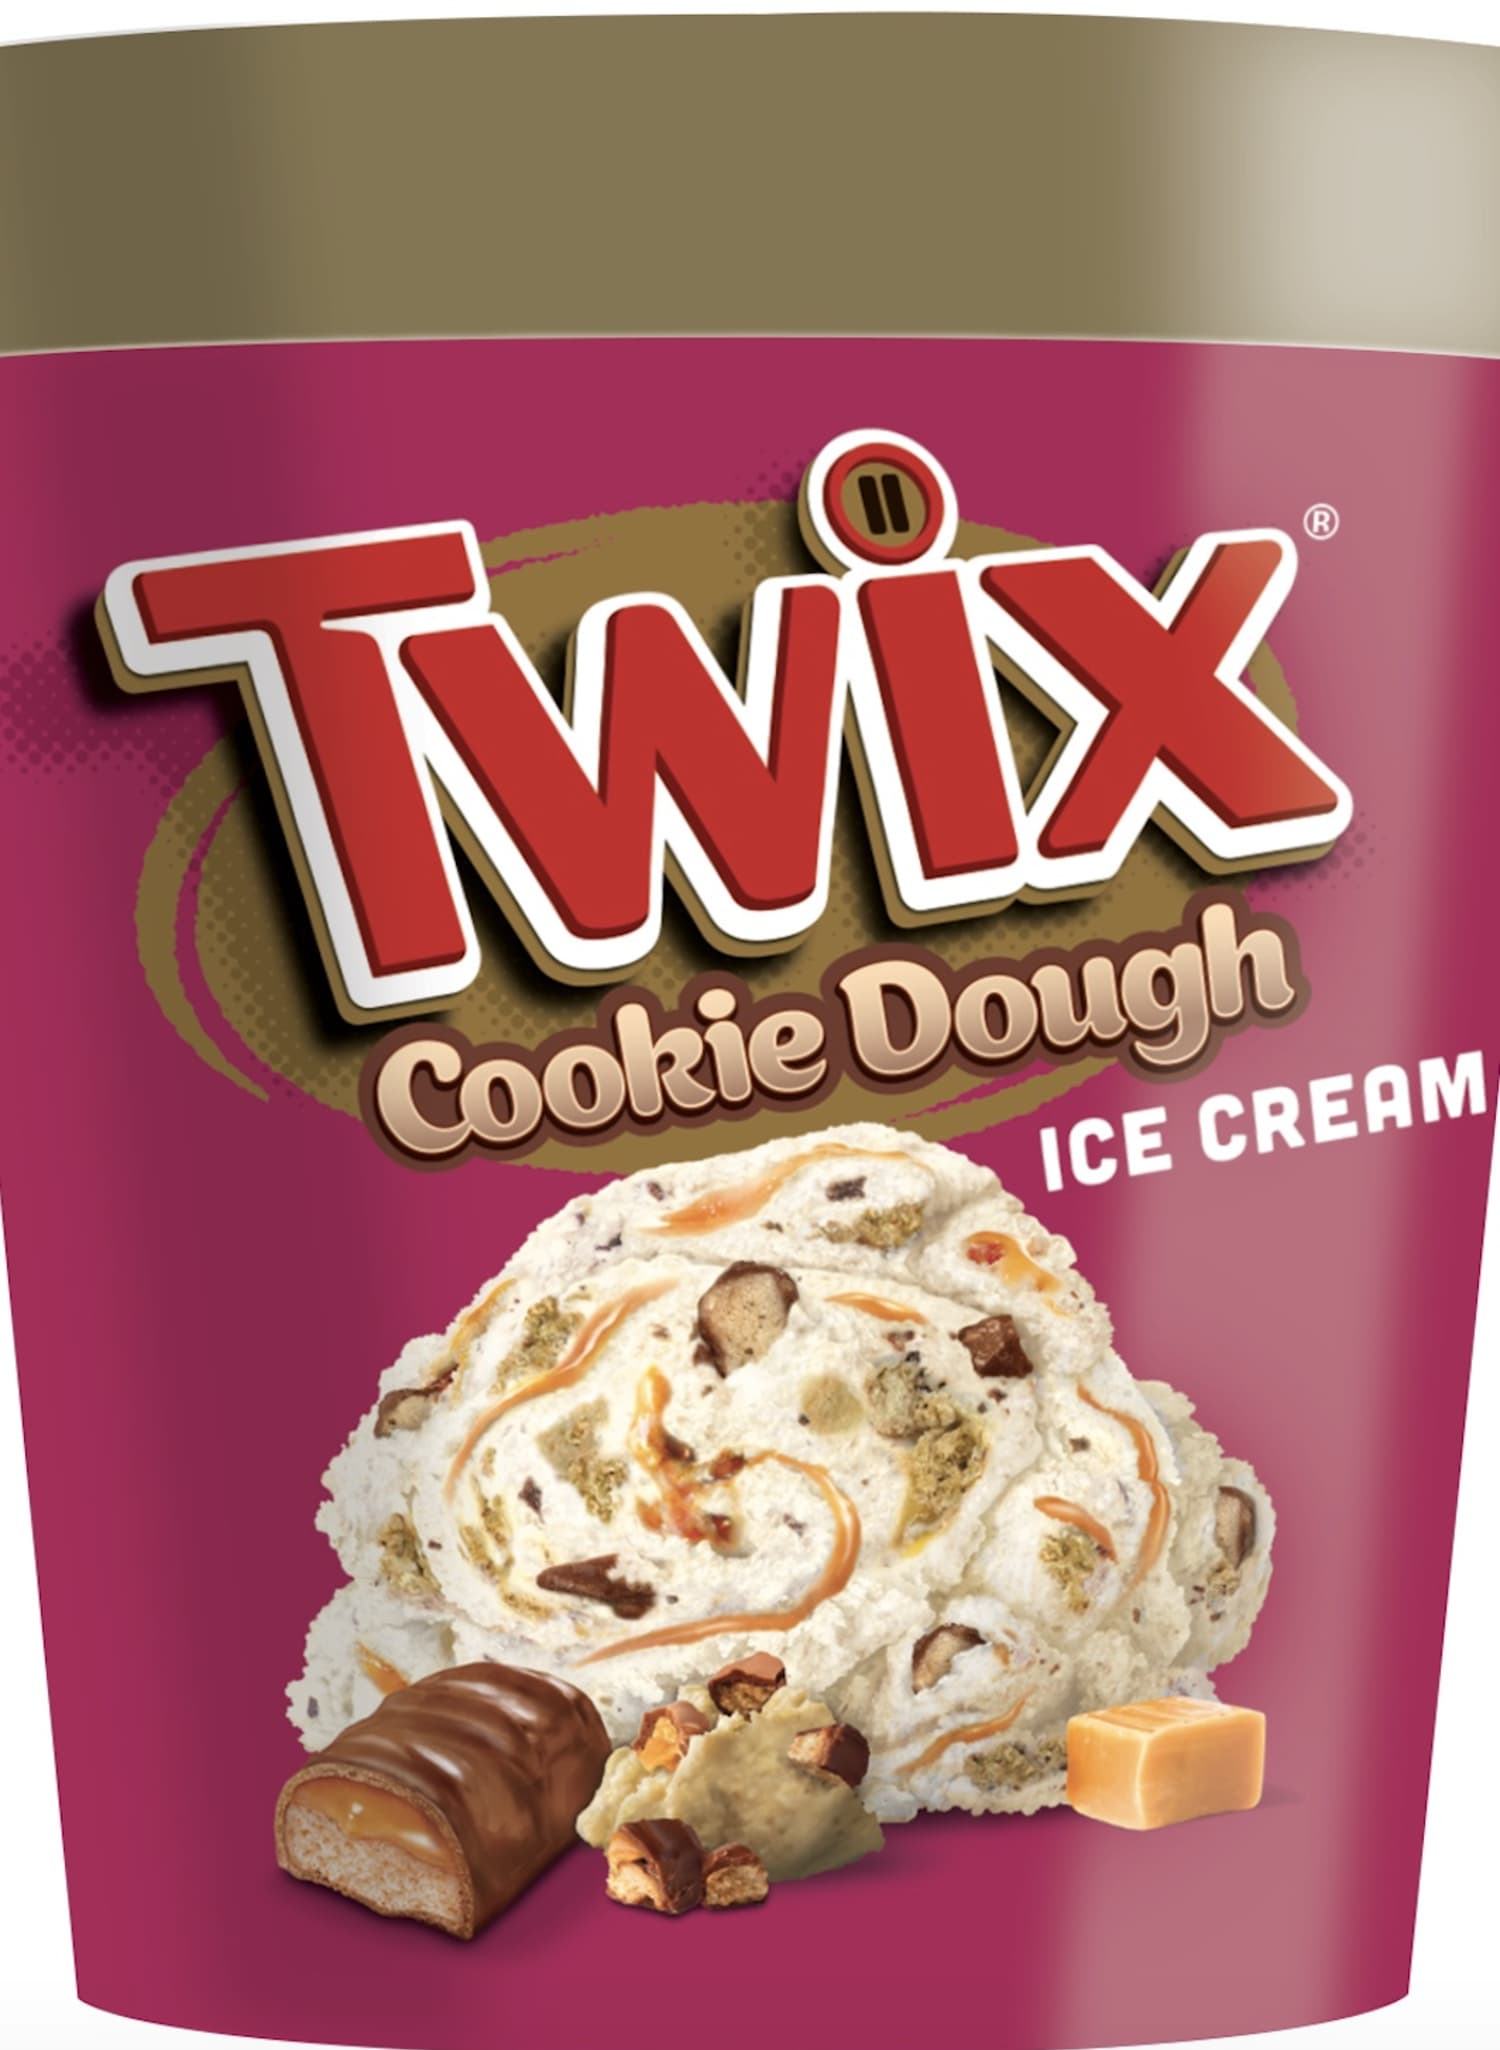 Twix and M&M’s Cookie Dough Ice Creams Are Hitting Shelves Soon